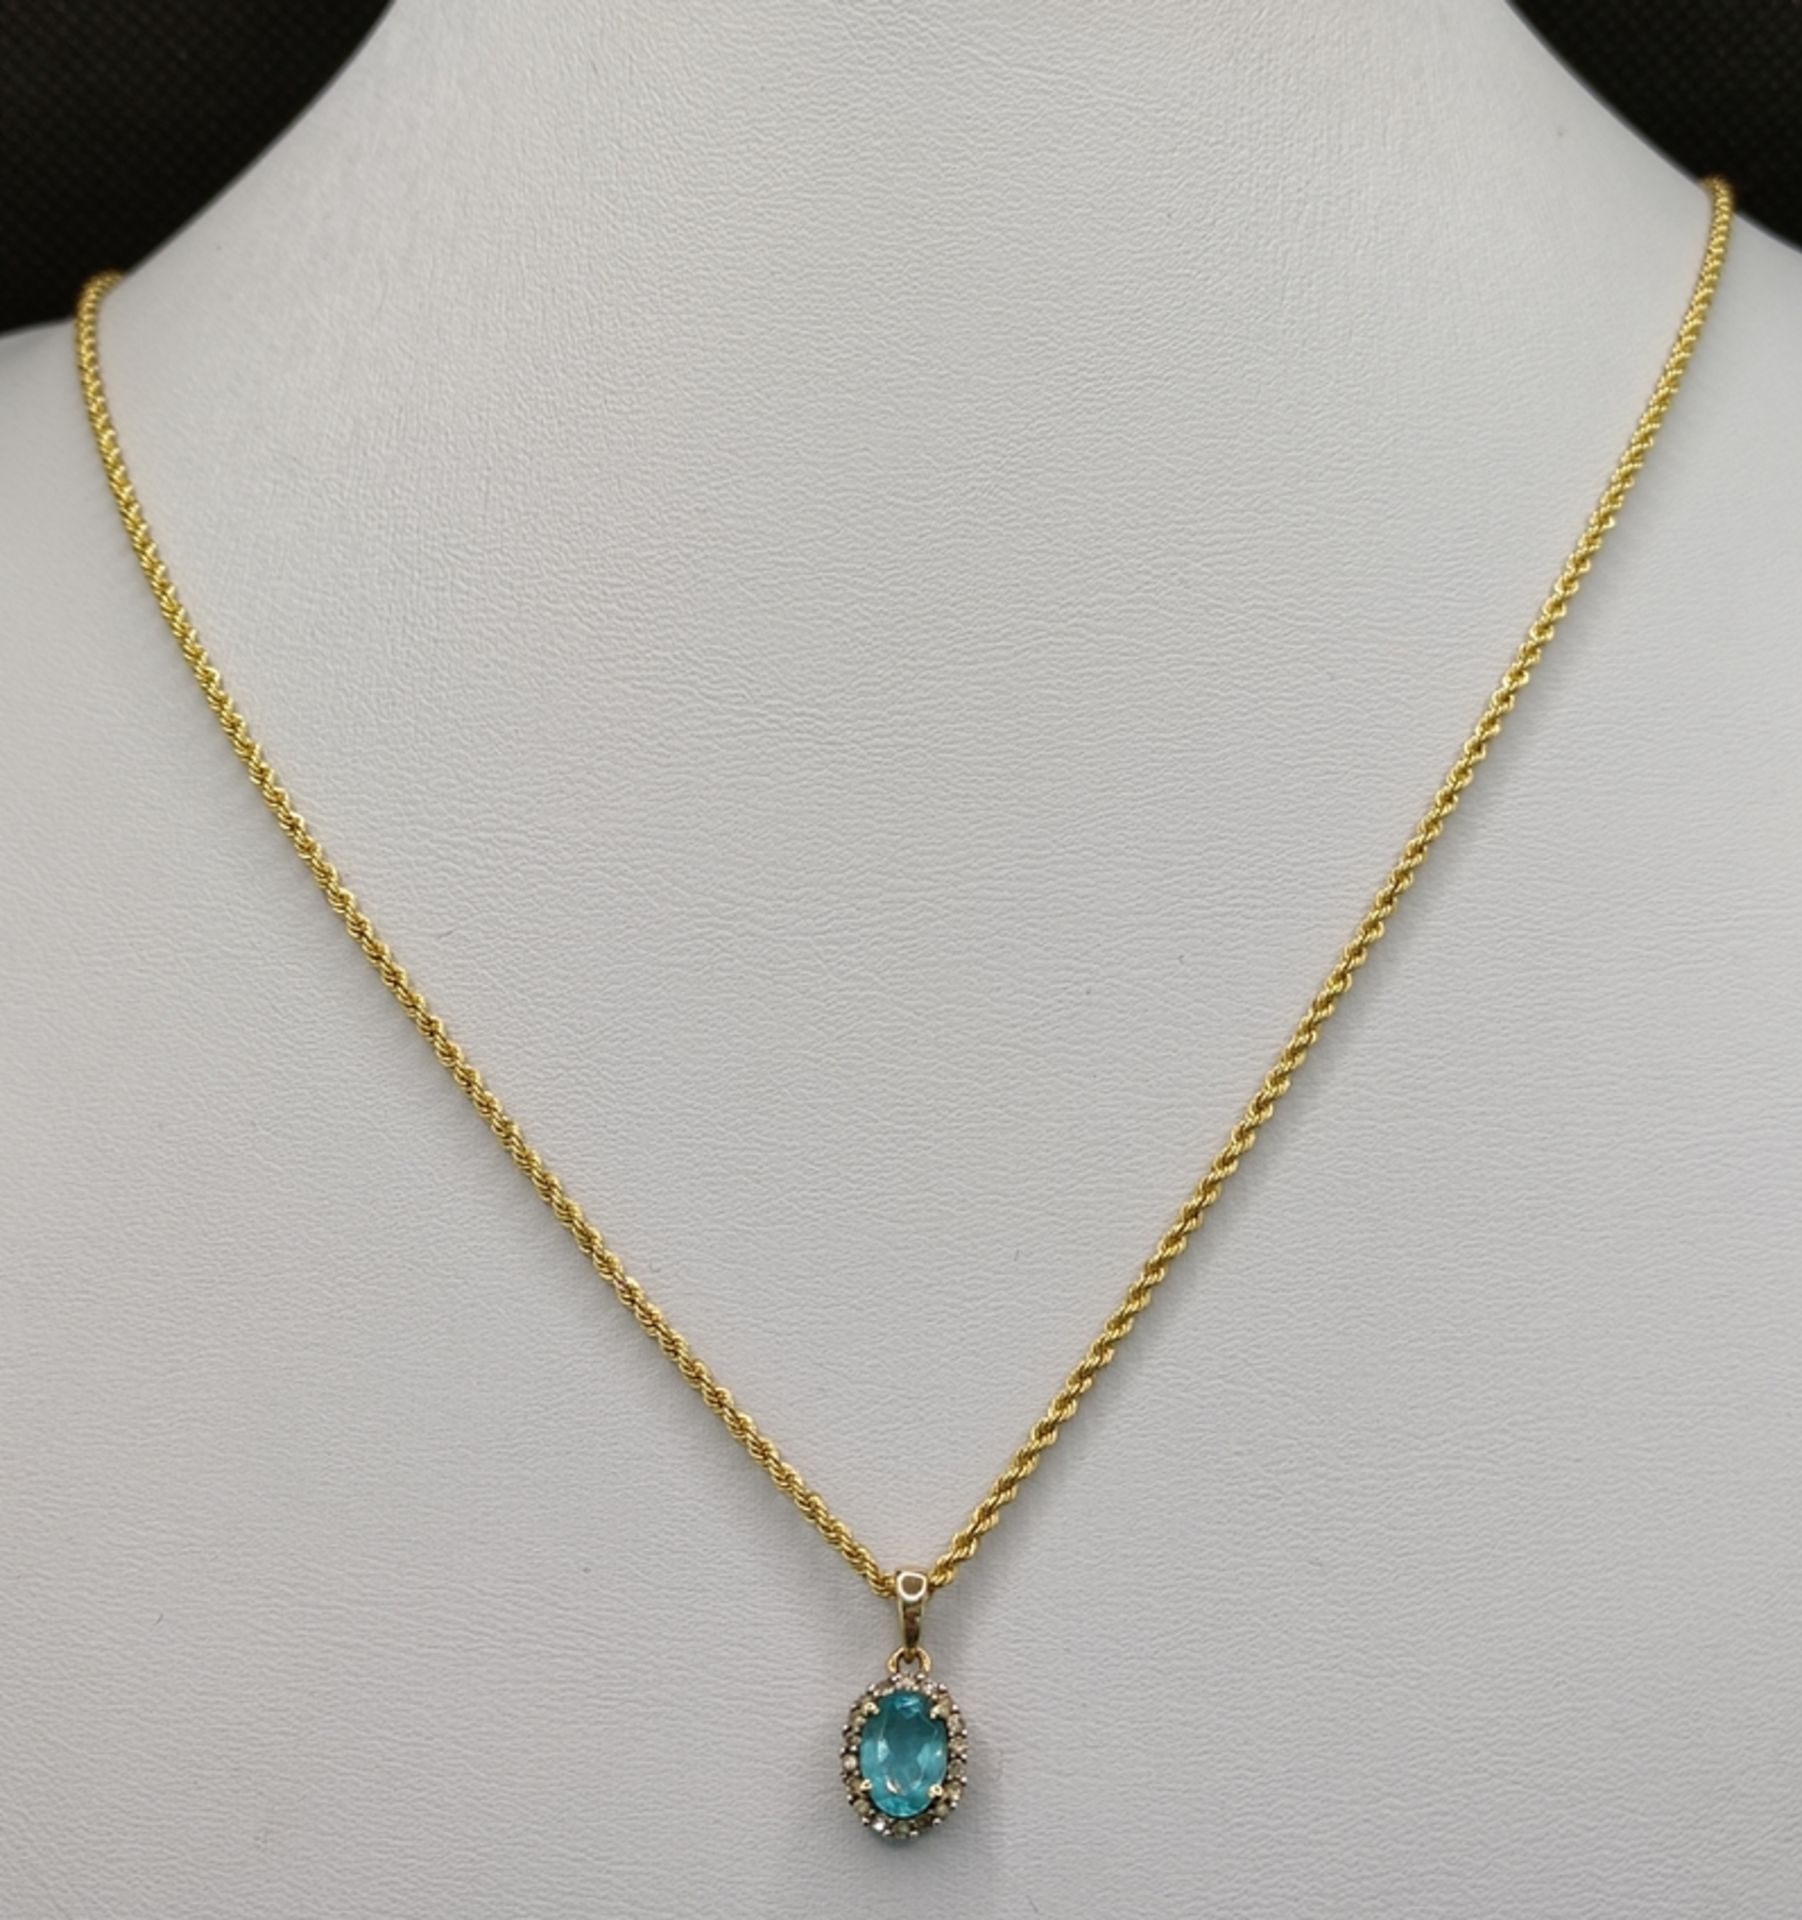 Pendant on cord chain, pendant with light blue gemstone, around it small diamonds, set in 585/14K y - Image 2 of 3